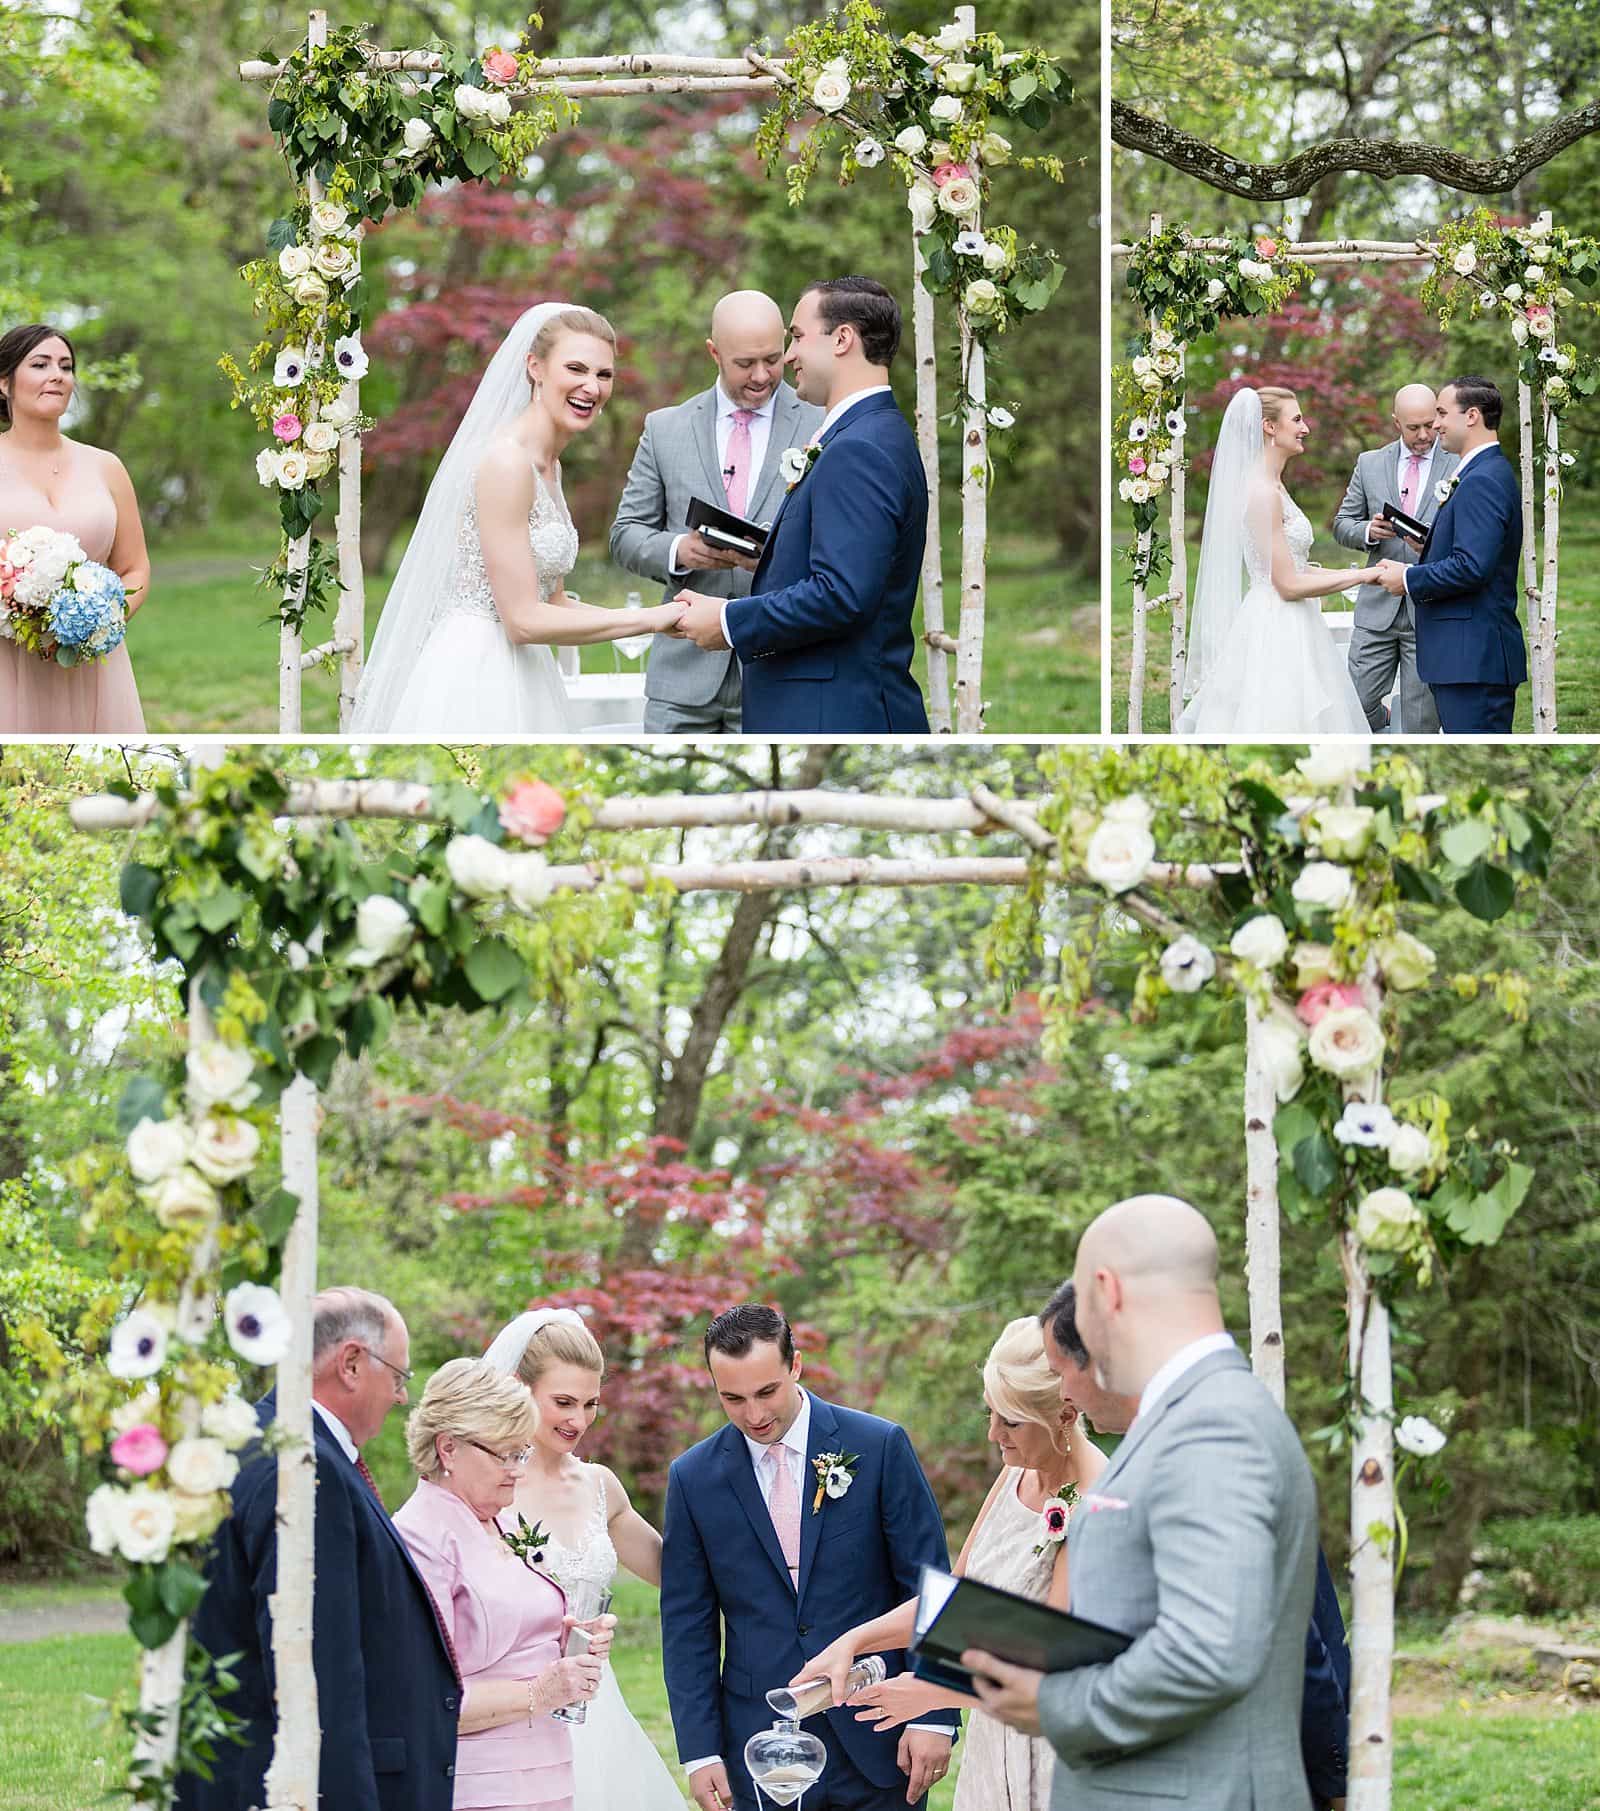 Bride and groom laughing during ceremony, Glen Foerd Mansion wedding